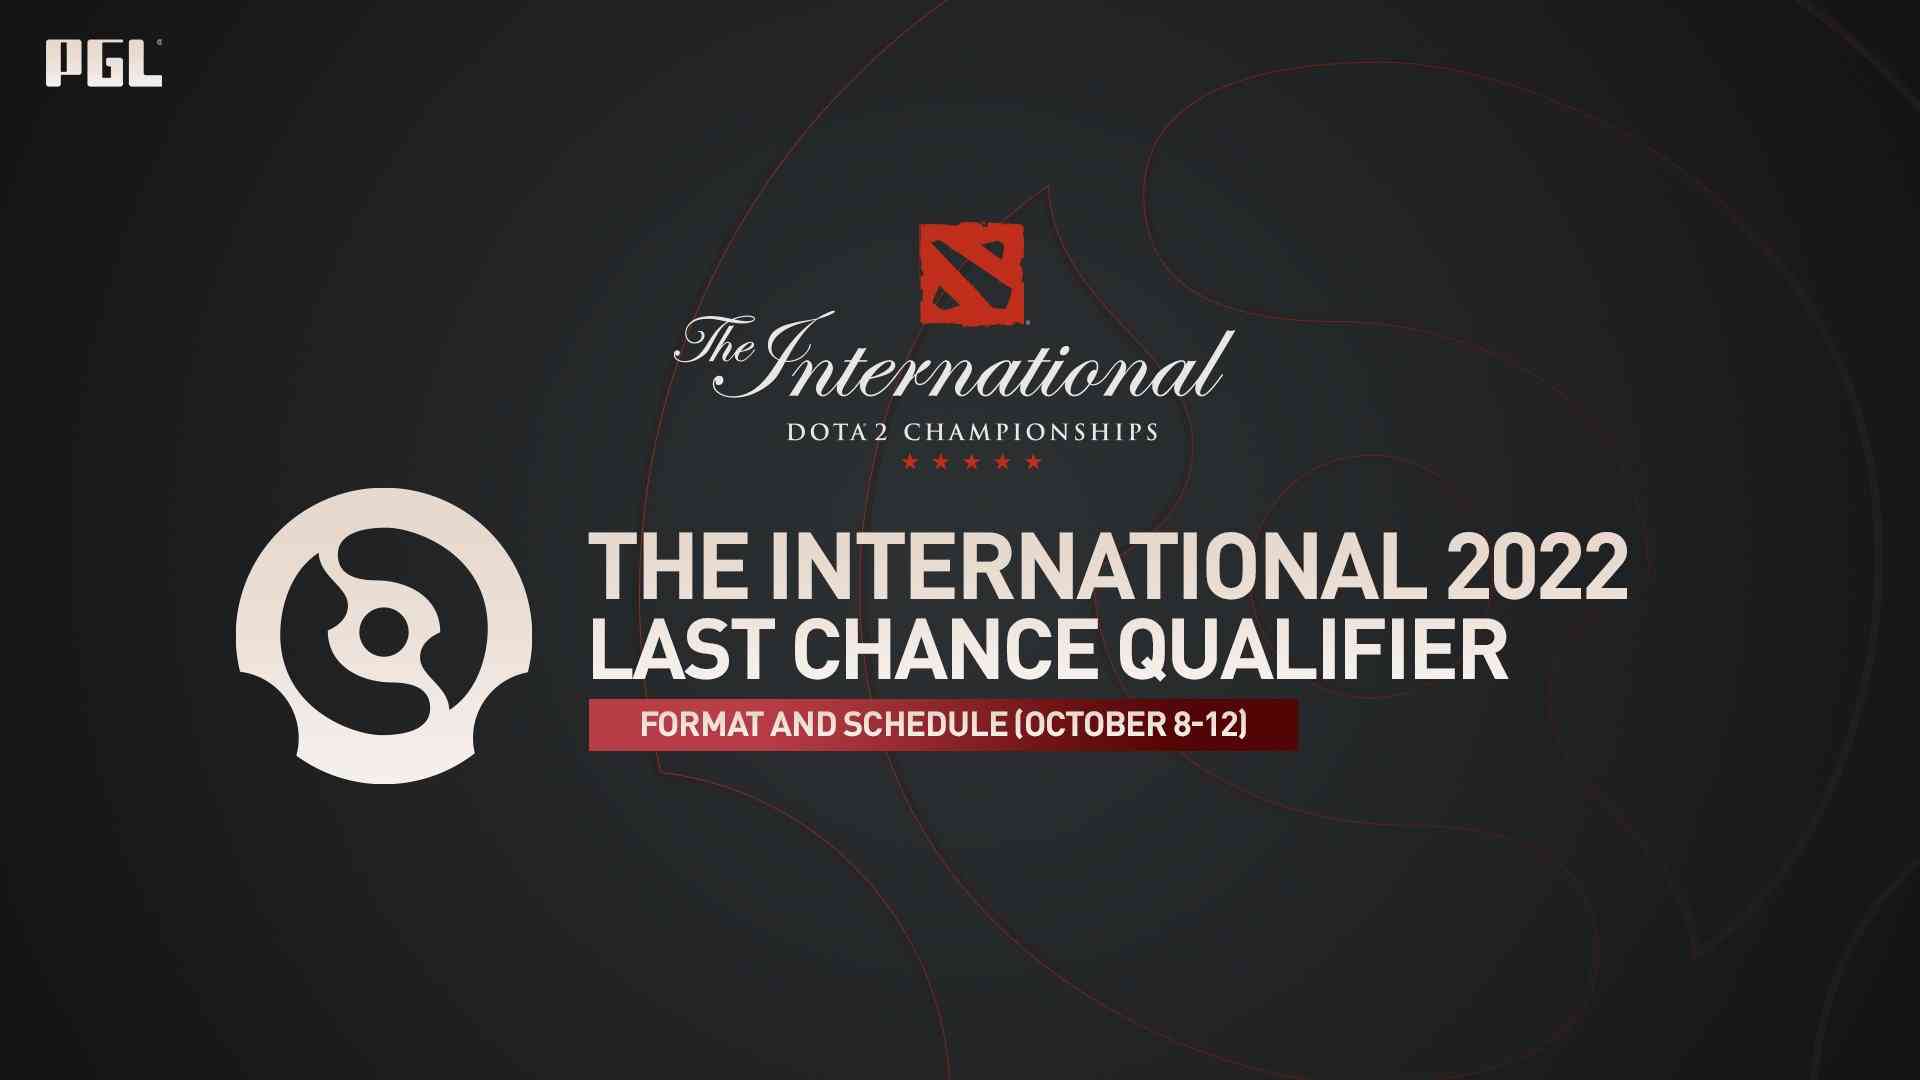 Decorative text against a black background reads "The International 2022 Last Chance Qualifier. Format and Schedule (October 8-12)"